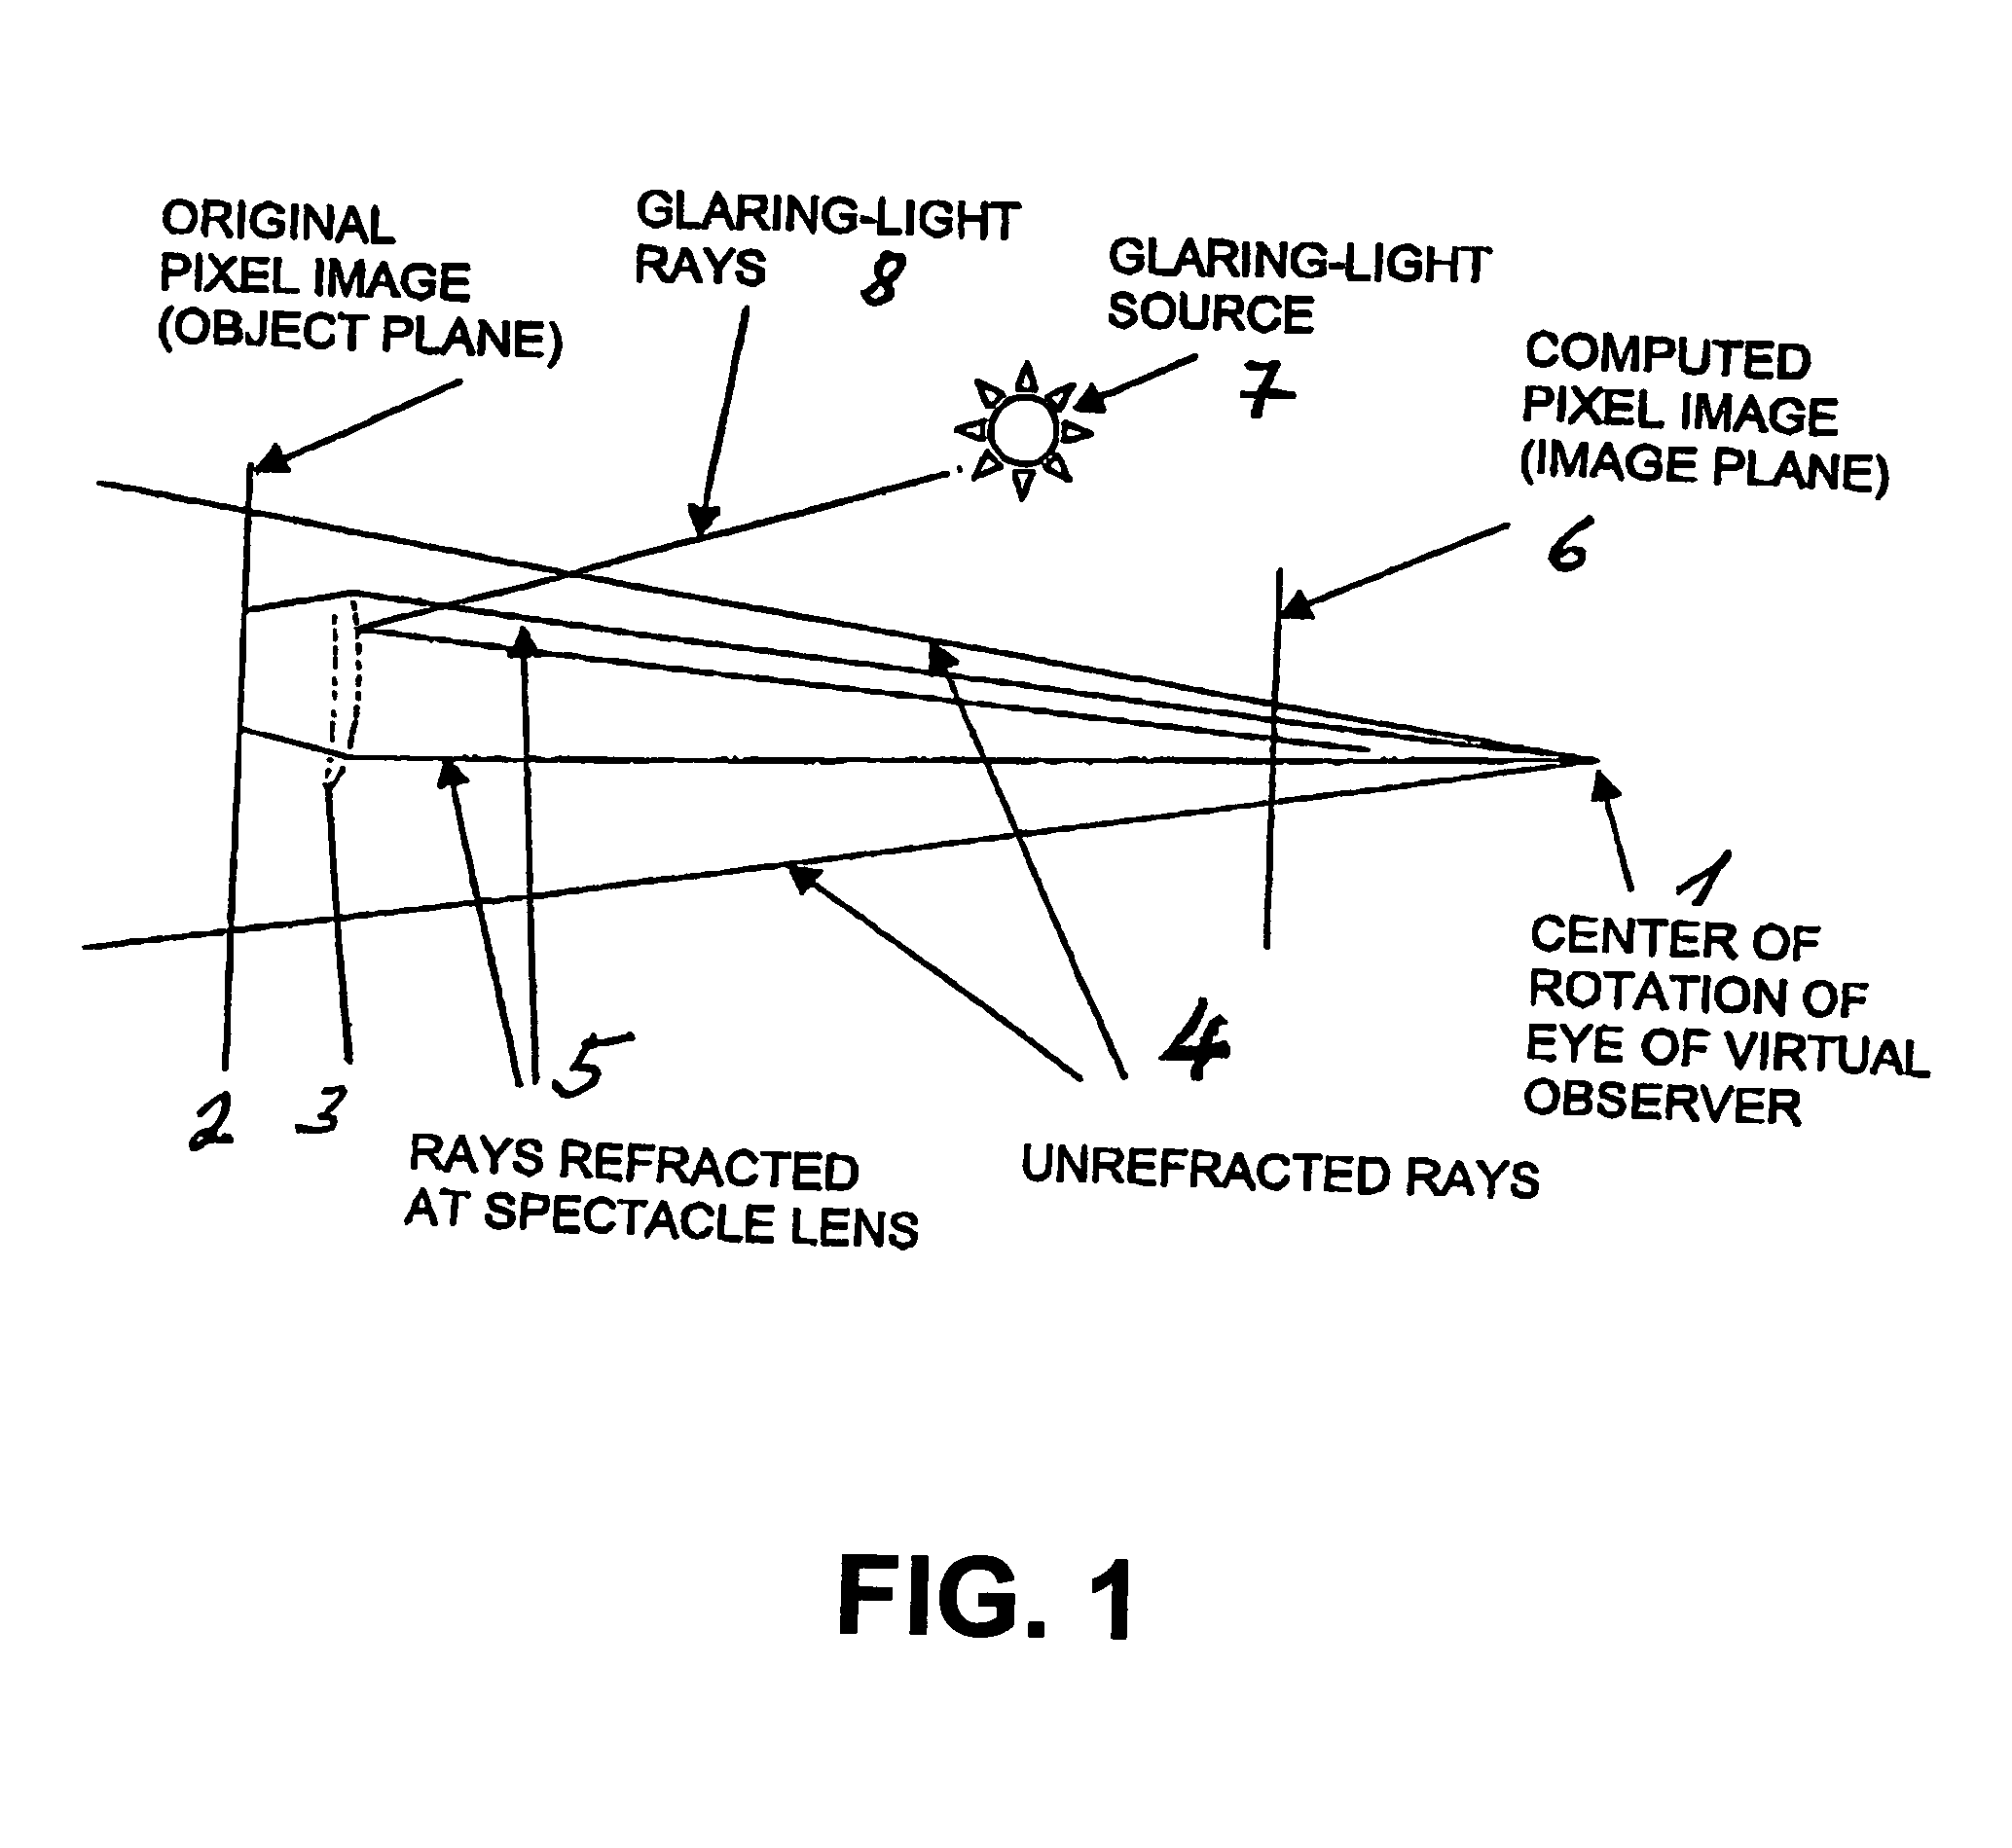 Method for simulating and demonstrating the optical effects of glasses on the human face